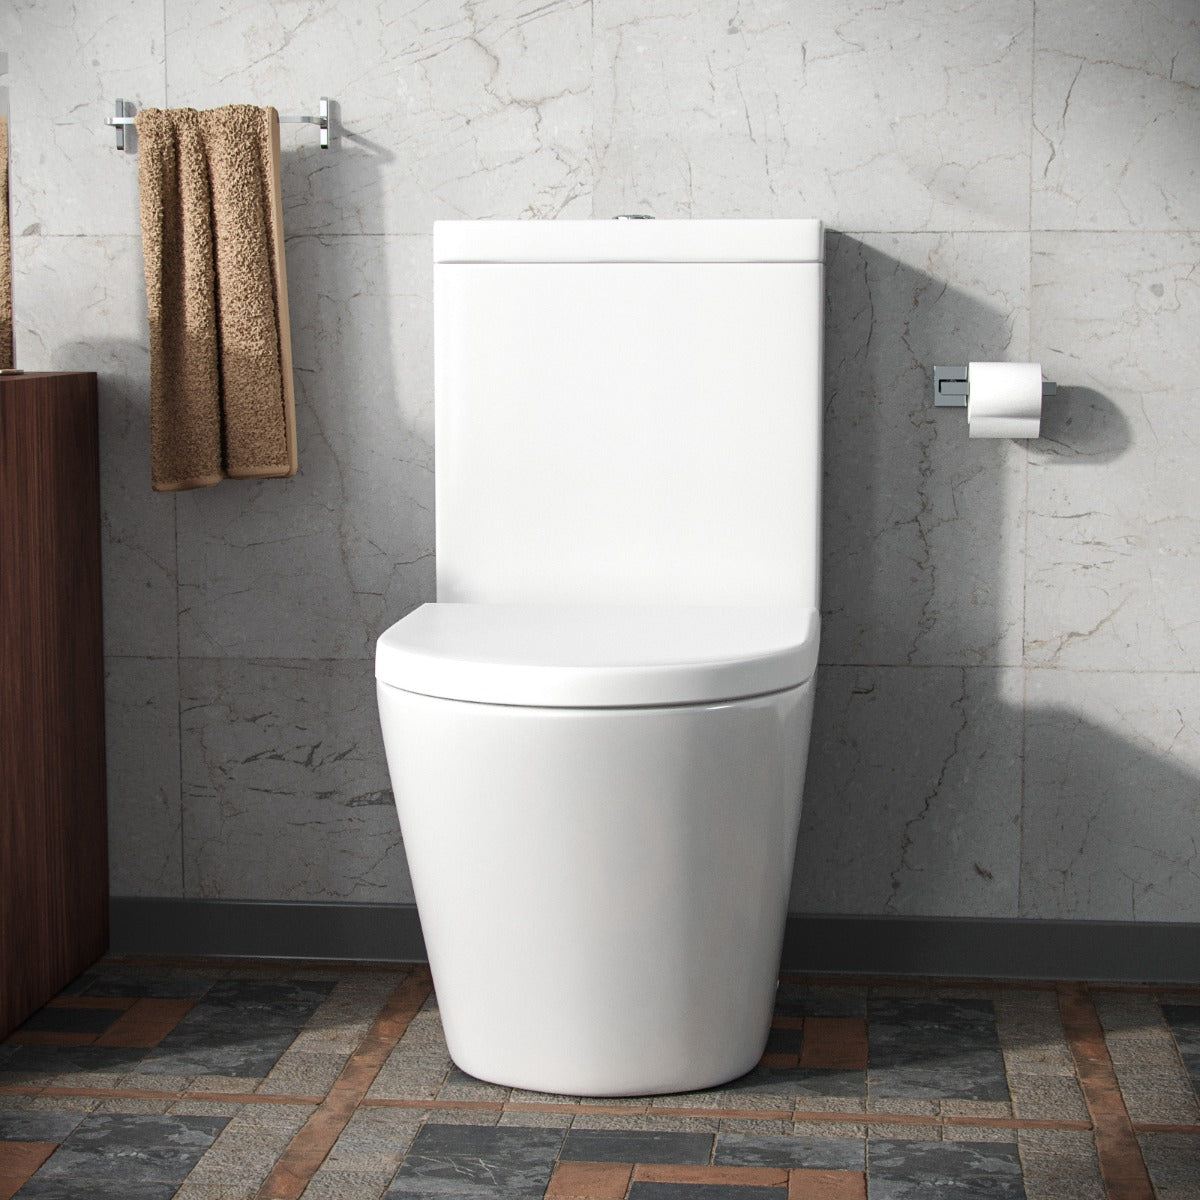 Magus Rimless Close Coupled Toilet with Soft Closing Seat